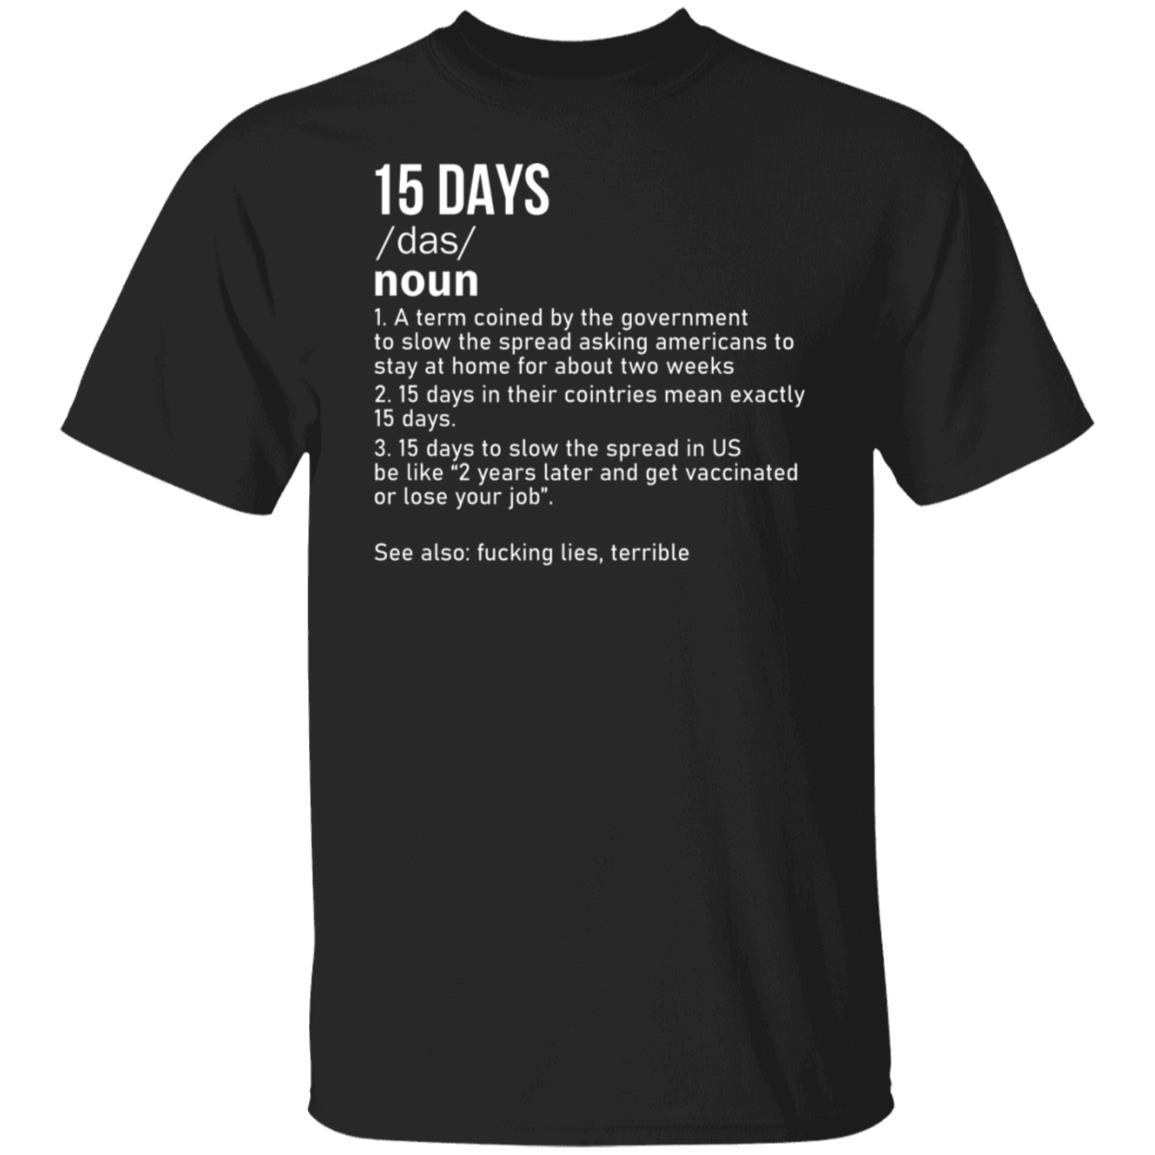 15-days-to-slow-the-spread-t-shirt-teemoonley